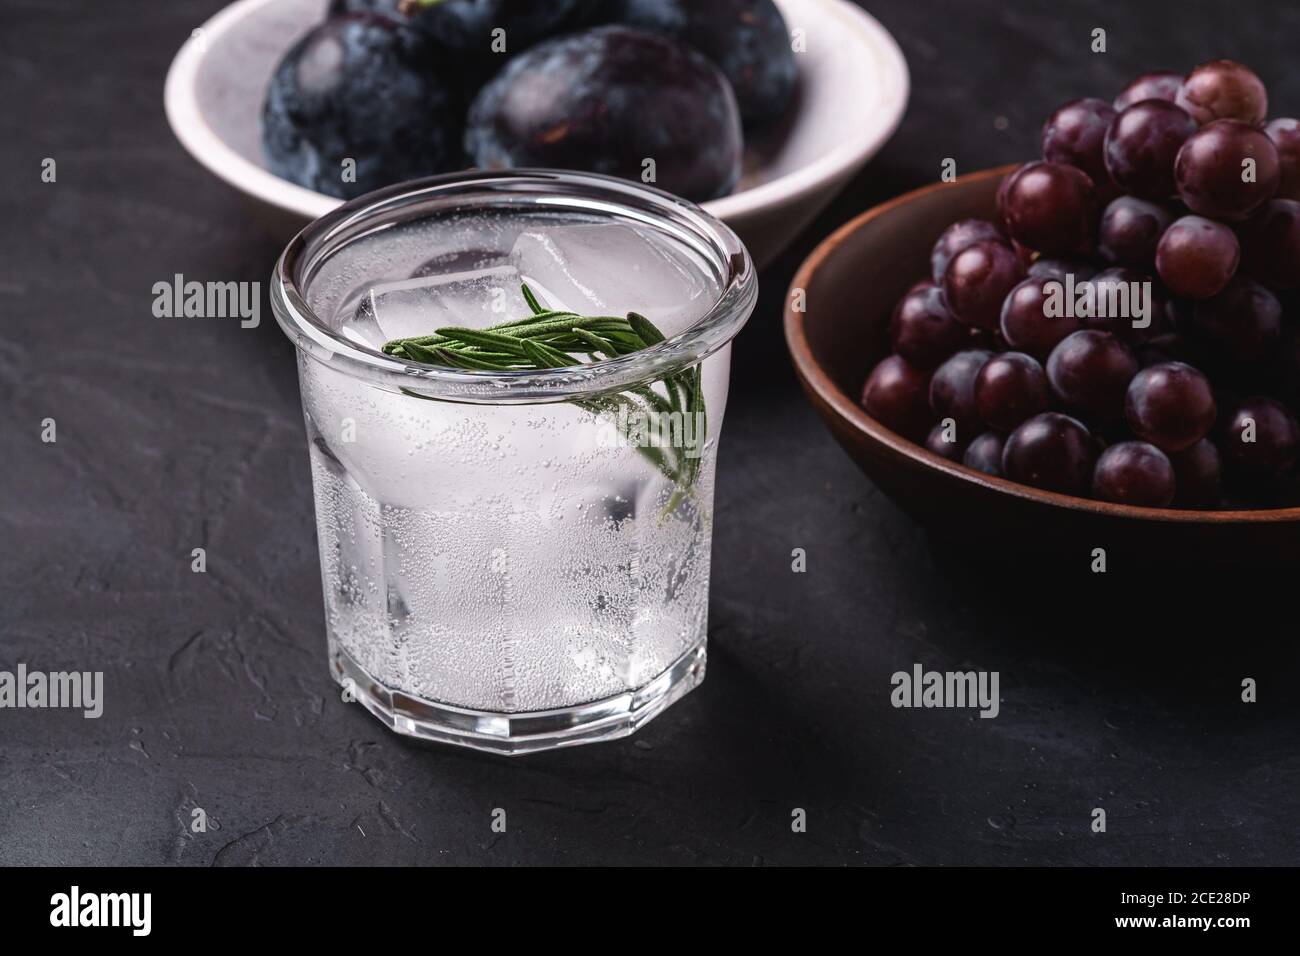 Fresh ice cold carbonated water in glass with rosemary leaf near to wooden bowls with grape and plum fruits, dark stone background, angle view Stock Photo